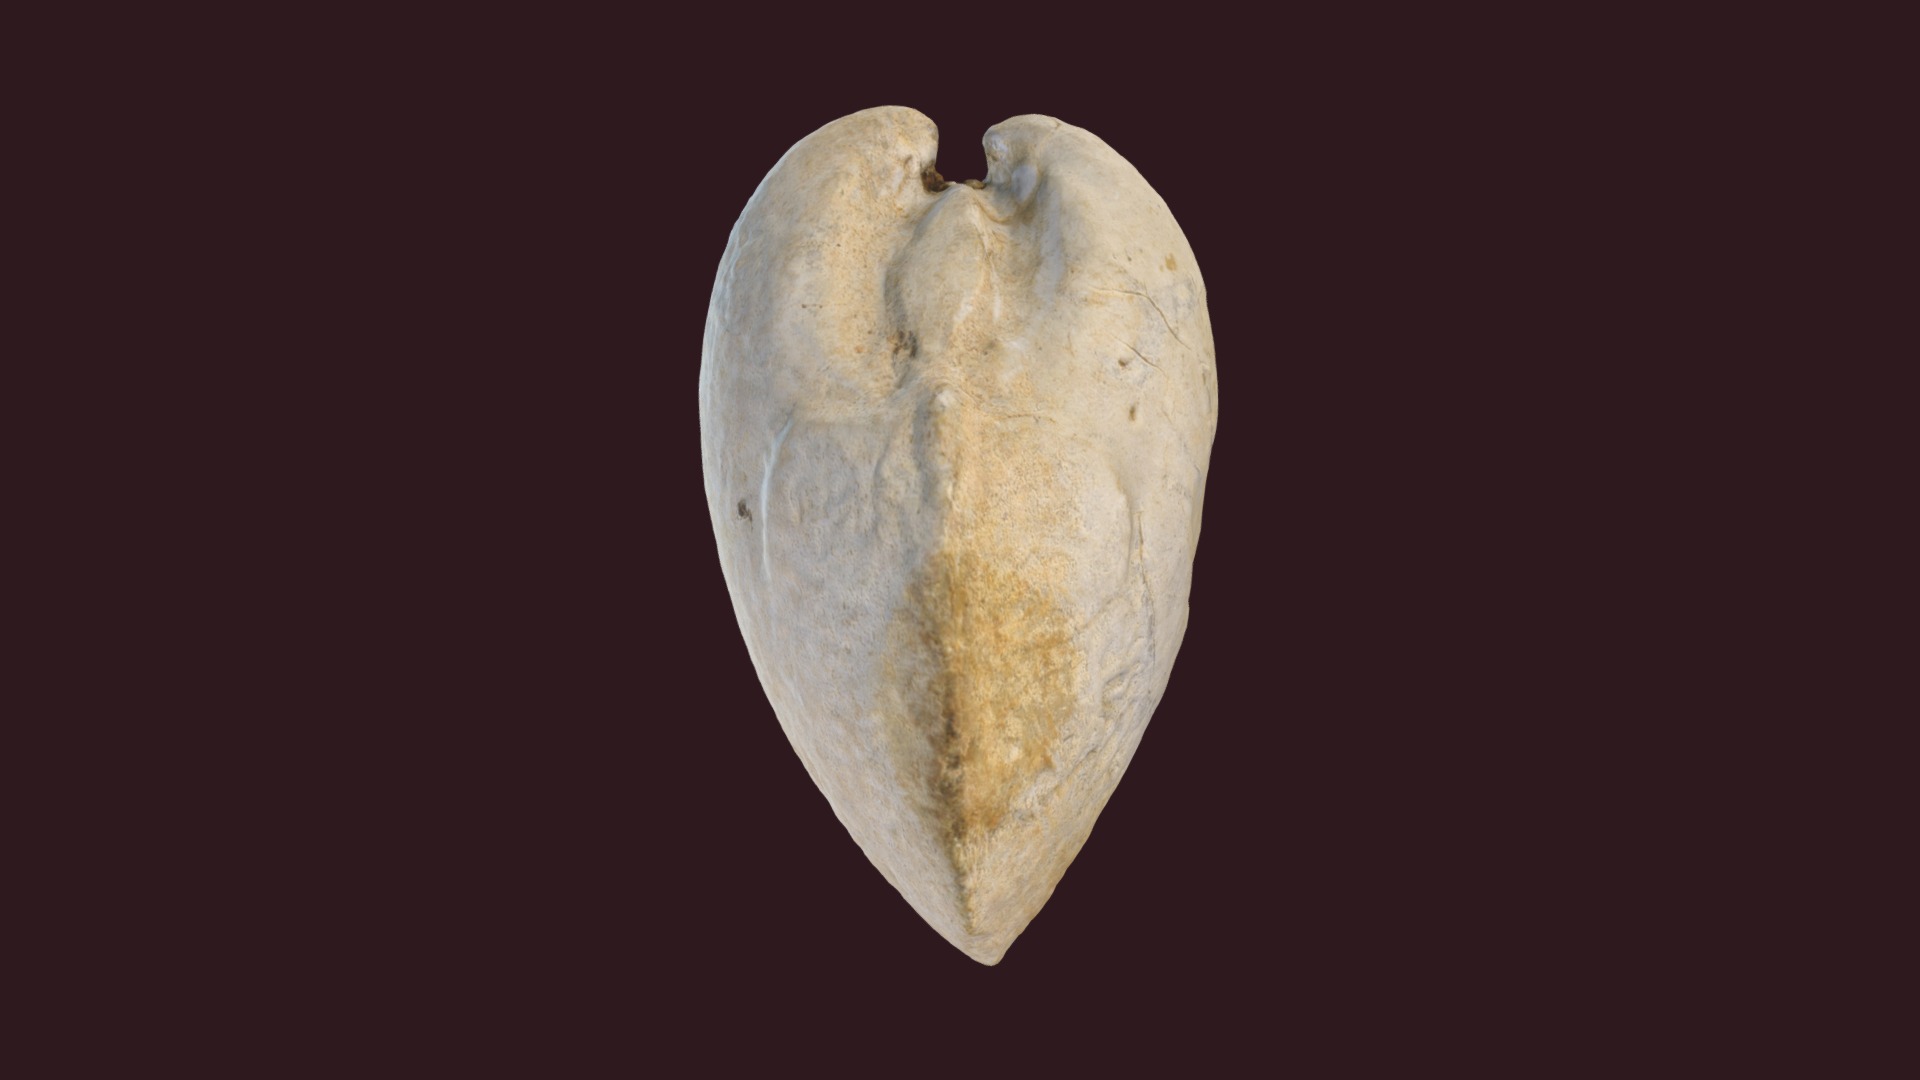 3D model Protocardia texana (steinkern) - This is a 3D model of the Protocardia texana (steinkern). The 3D model is about a close-up of a banana.